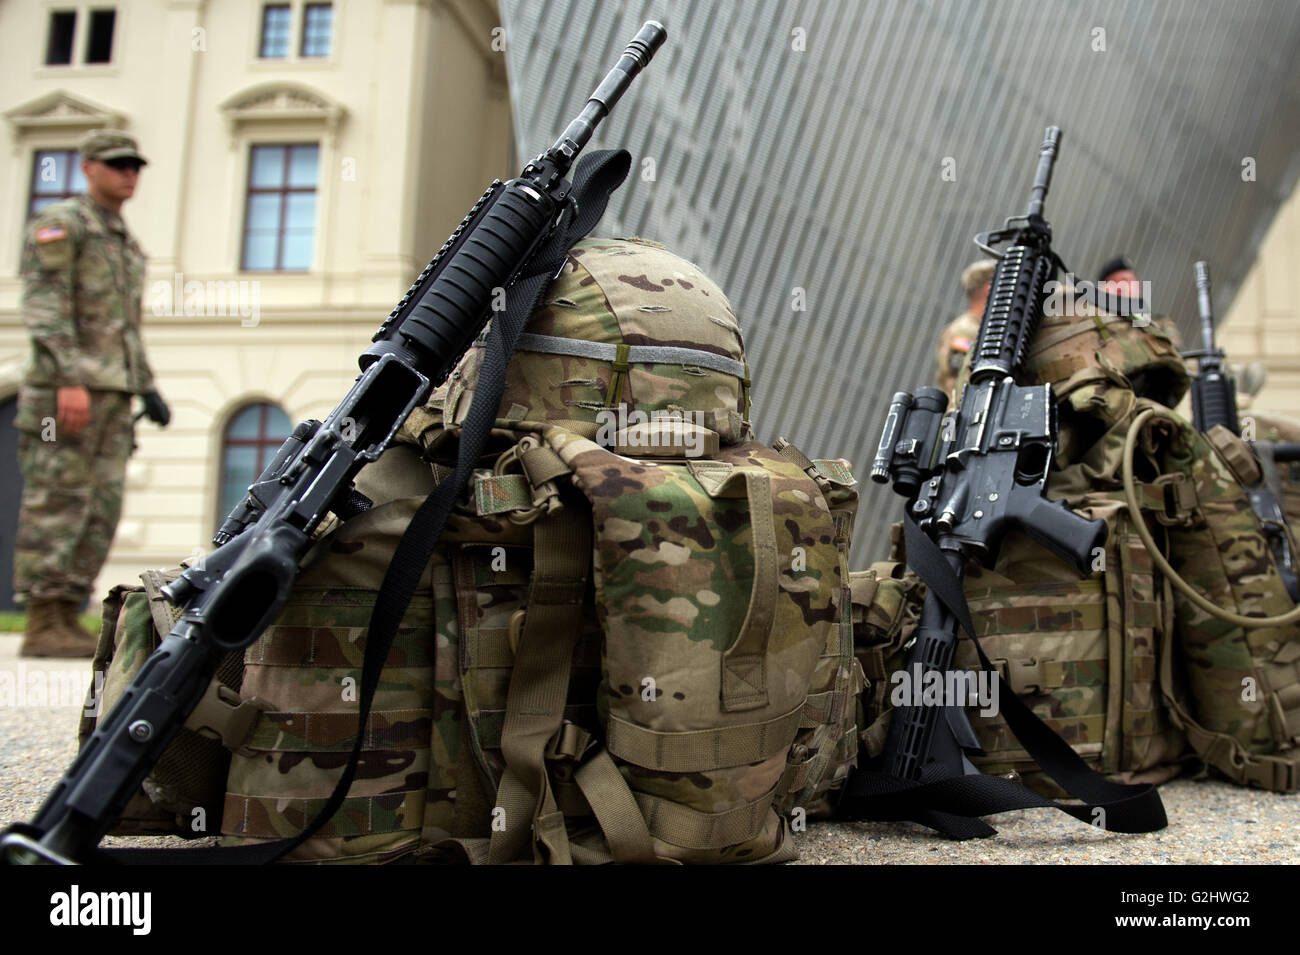 Dresden, Germany. 01st June, 2016. US Army Europe soldiers' luggage and M4 assault rifles can be seen in front of the Military History Museum in Dresden, Germany, 01 June 2016. On the occasion of the NATO operation 'Saber Strike 16' (30 May until 02 June 2016), American Stryker vehicles and current German Armed Forces vehicles will be presented to the public in front of the museum. Photo: ARNO BURGI/dpa/Alamy Live News Stock Photo